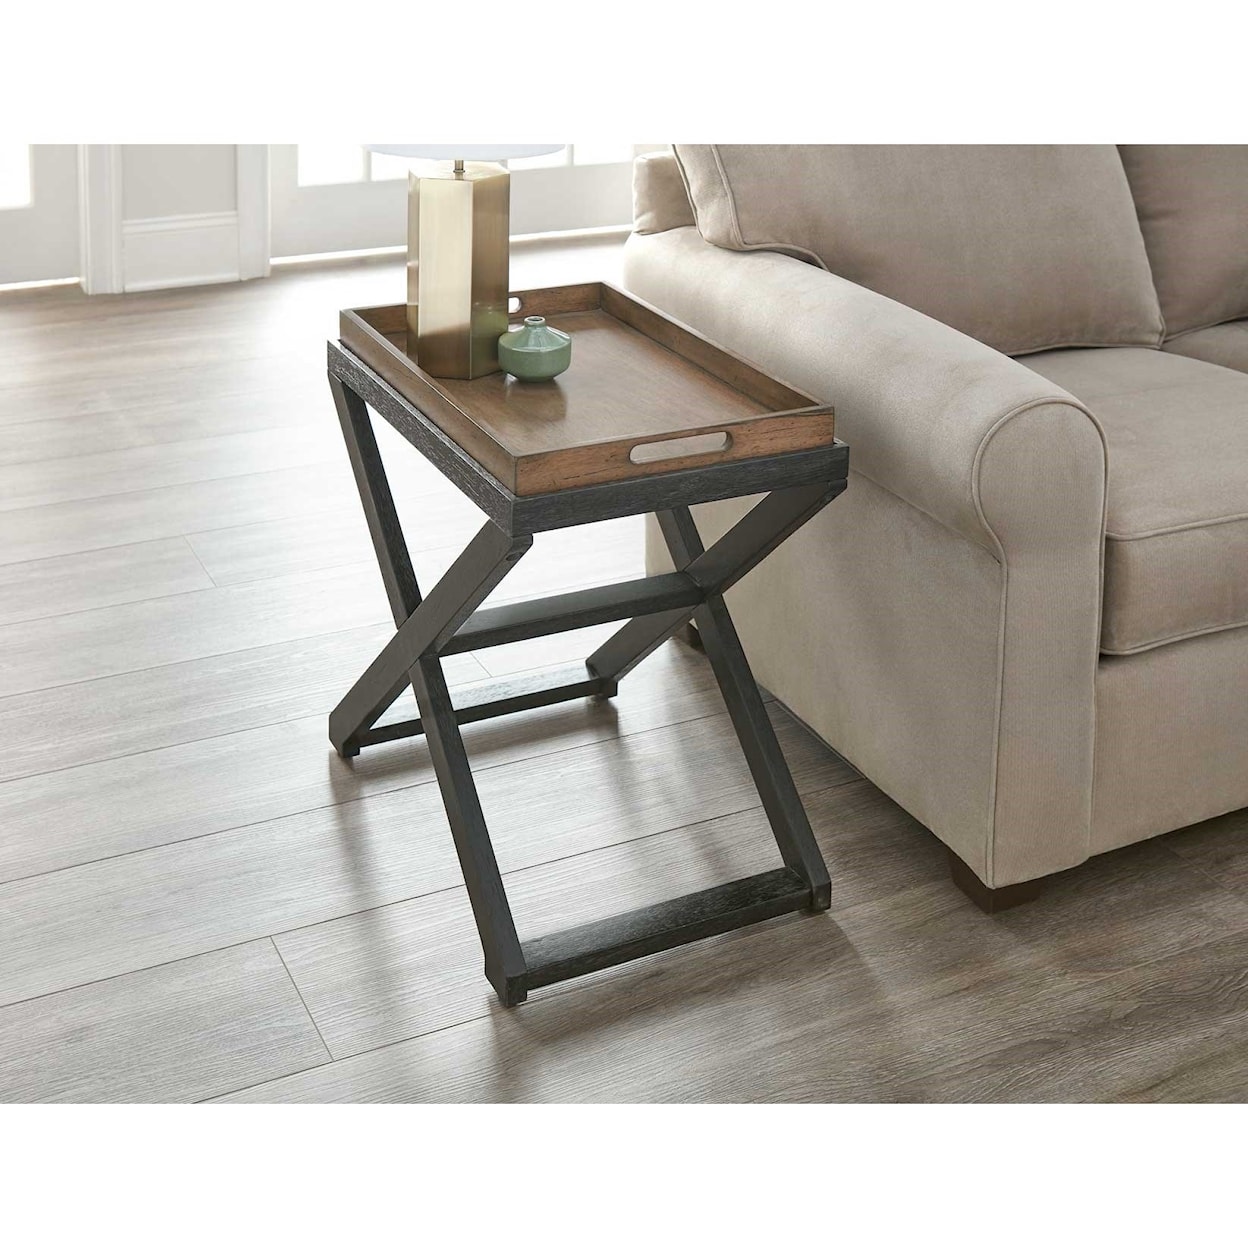 Steve Silver Topeka Chairside Table